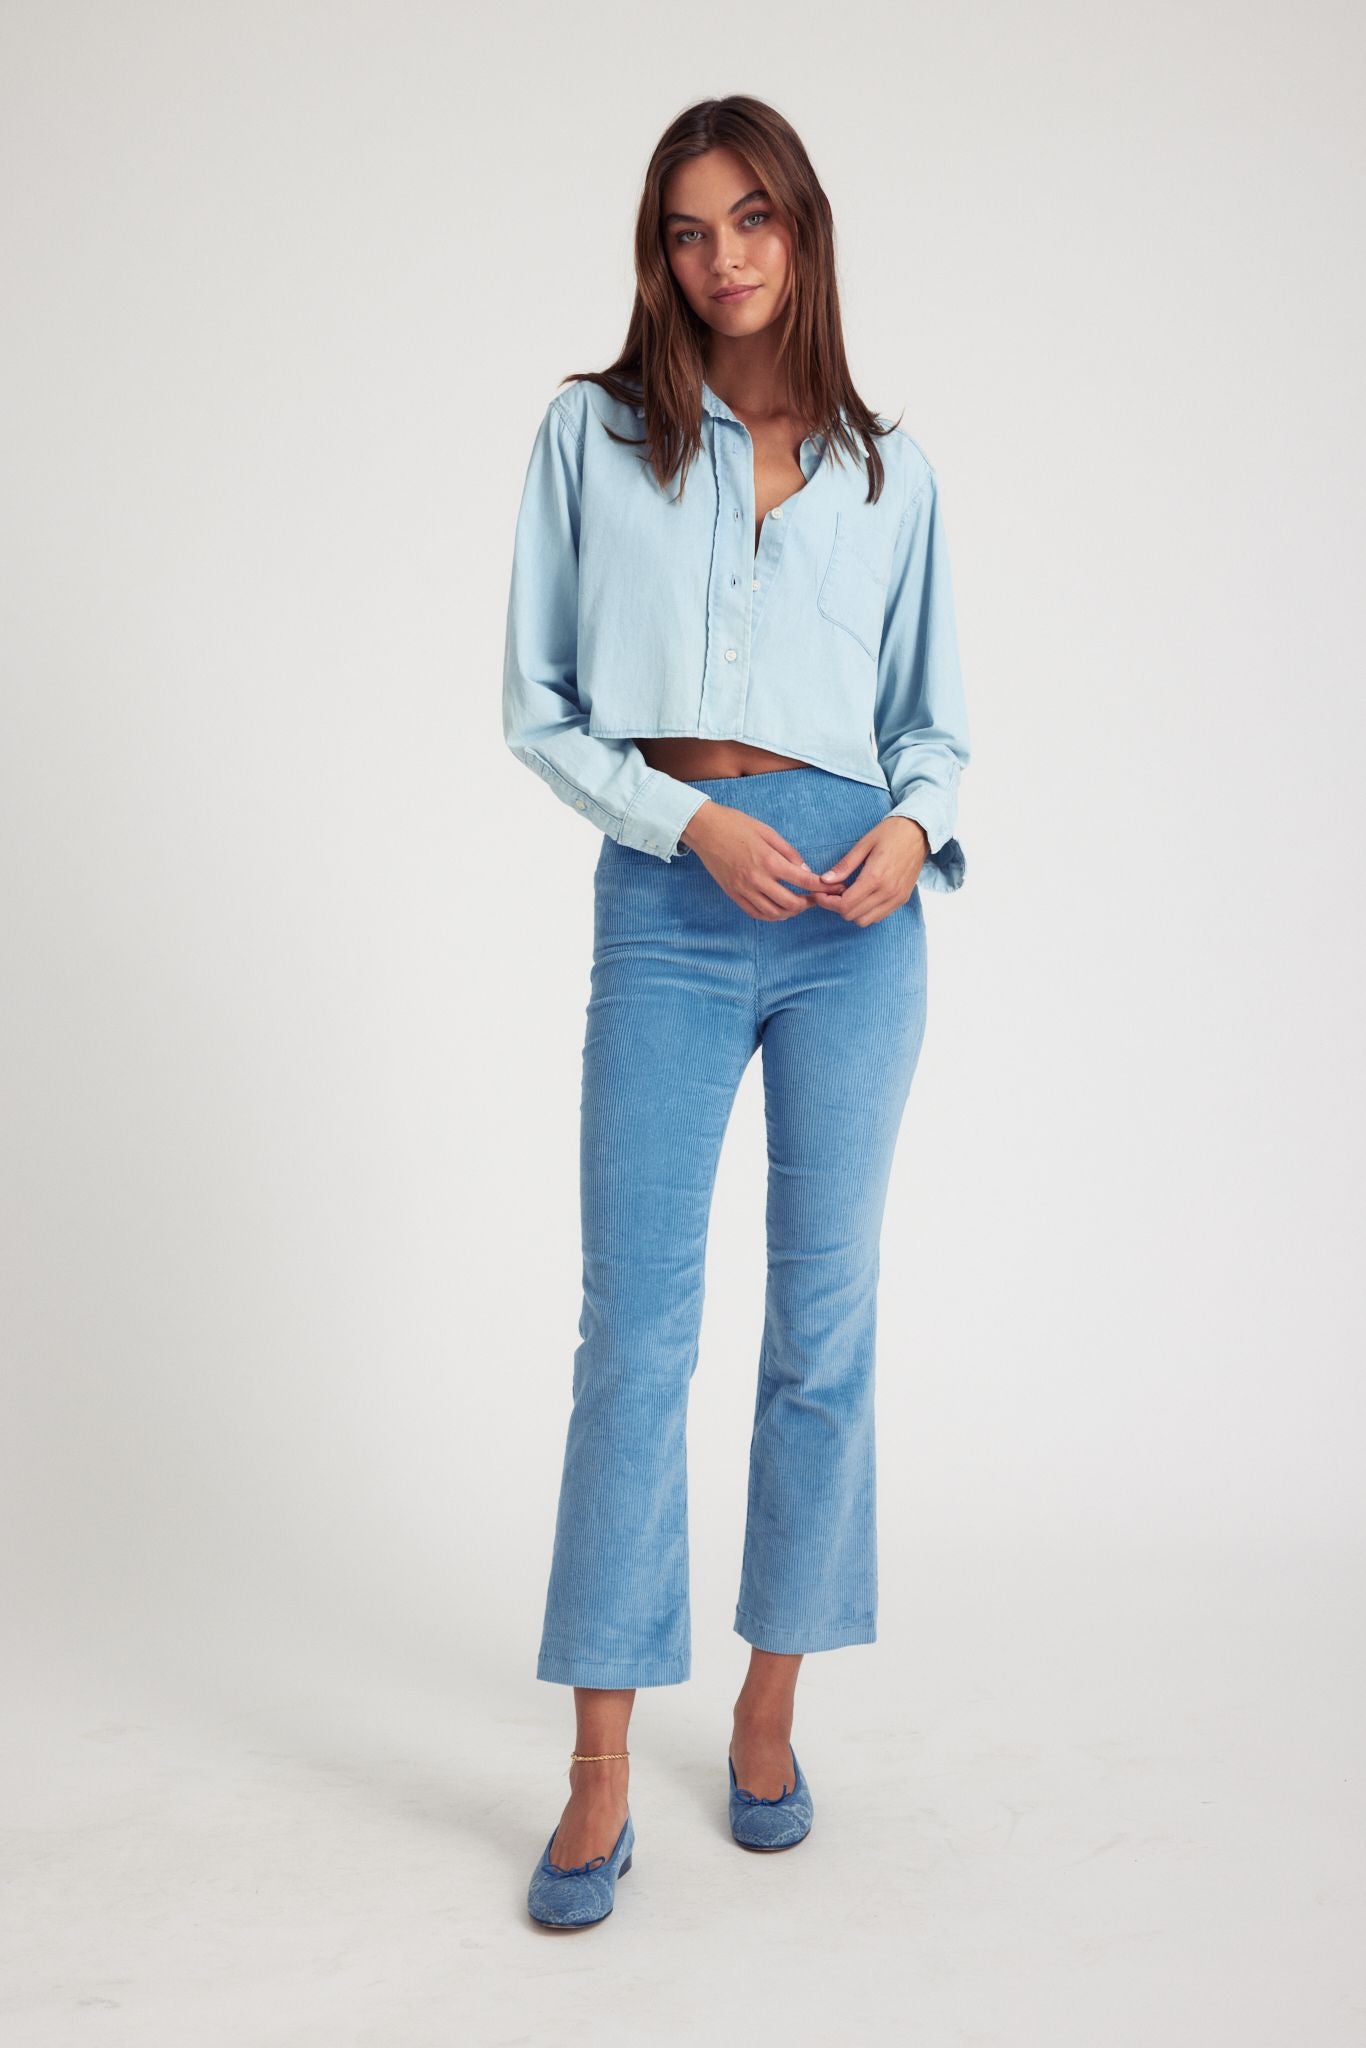 Chambray Blue Corduroy Ankle Flare Pants